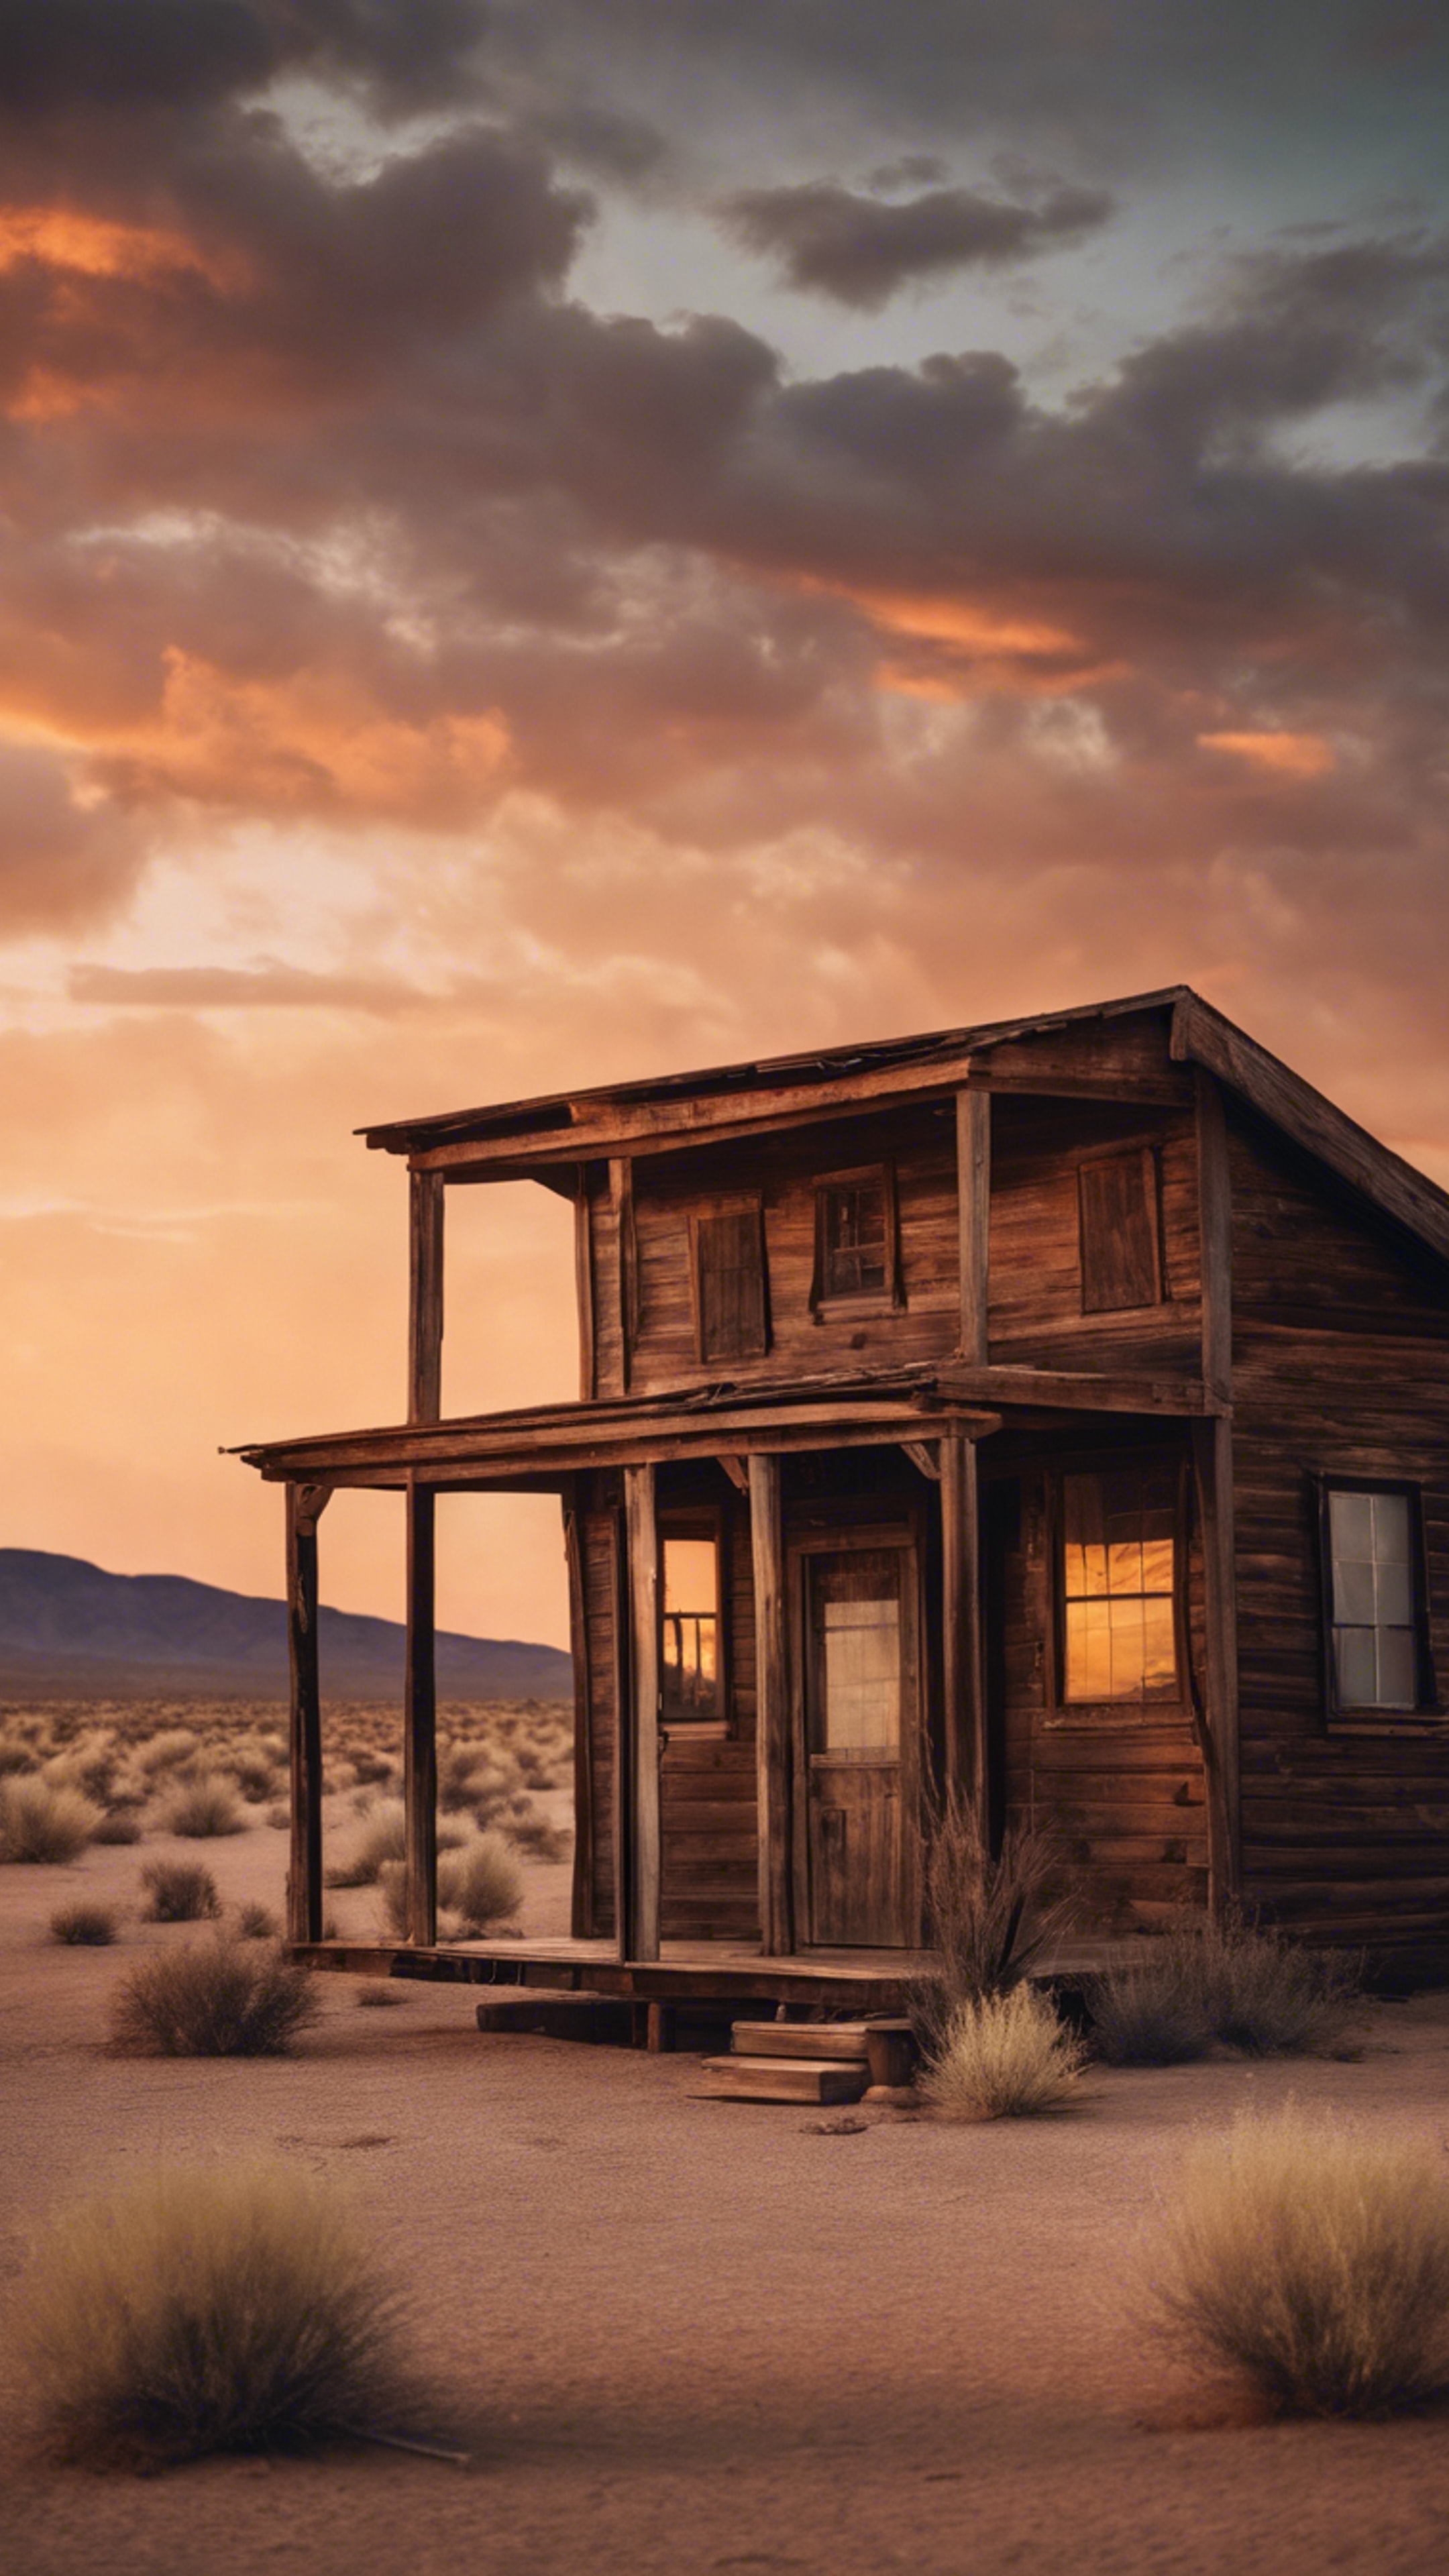 A dust-swept desert scene with a lone cabin standing resiliently during a blazing sunset in the wild west.壁紙[55ae6b4a2ff440e59218]